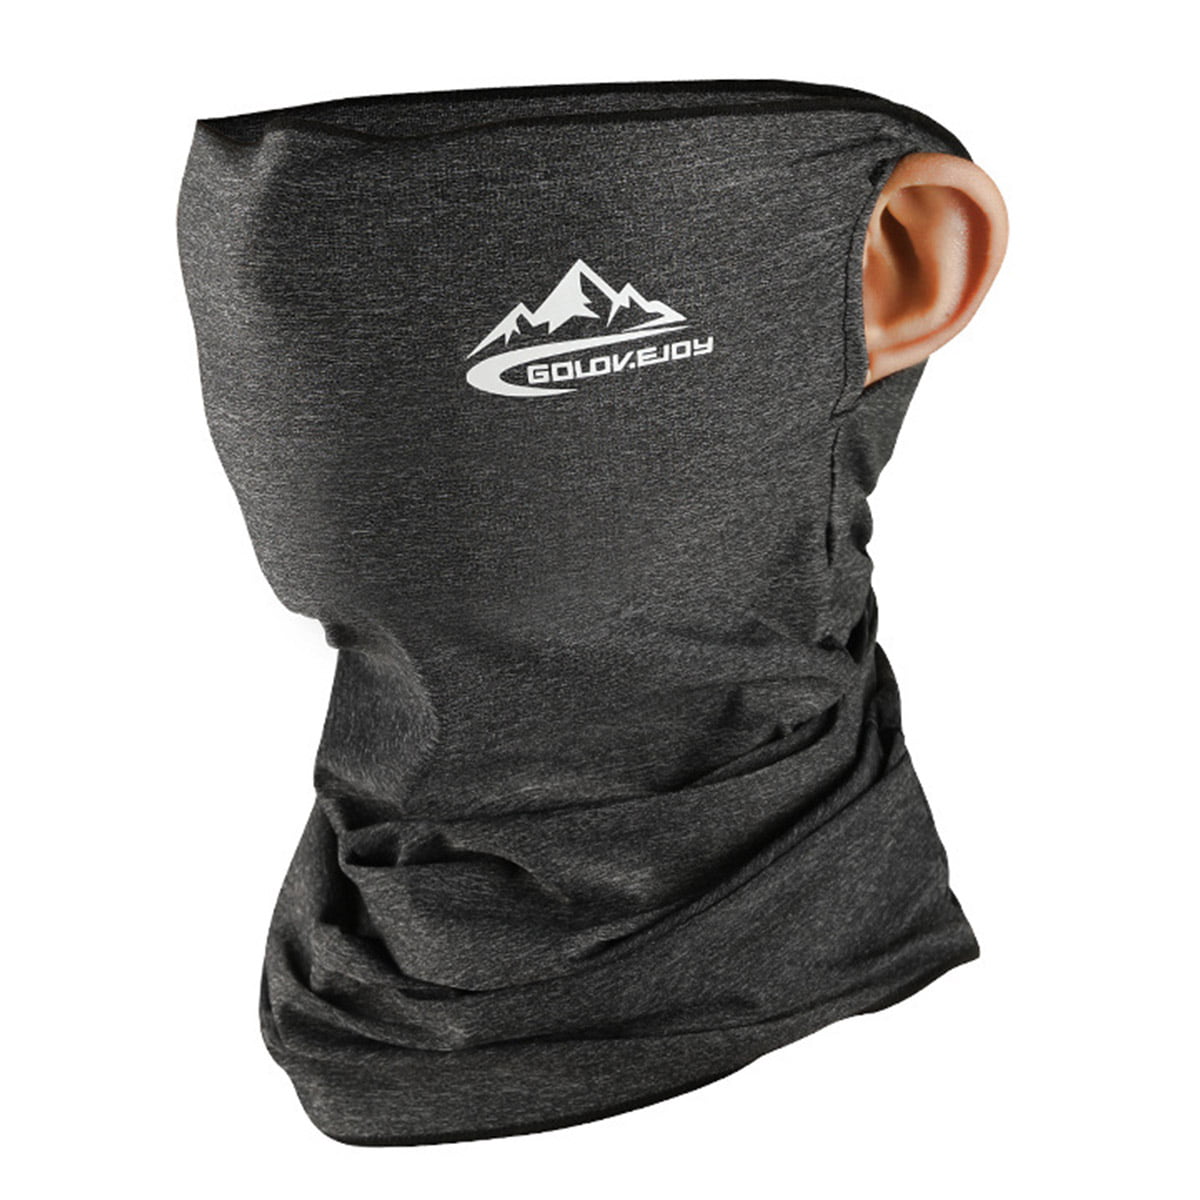 Kawell - Ice Silk Ski Mask, Wind-Resistant Face Mask, Hinged Design to ...